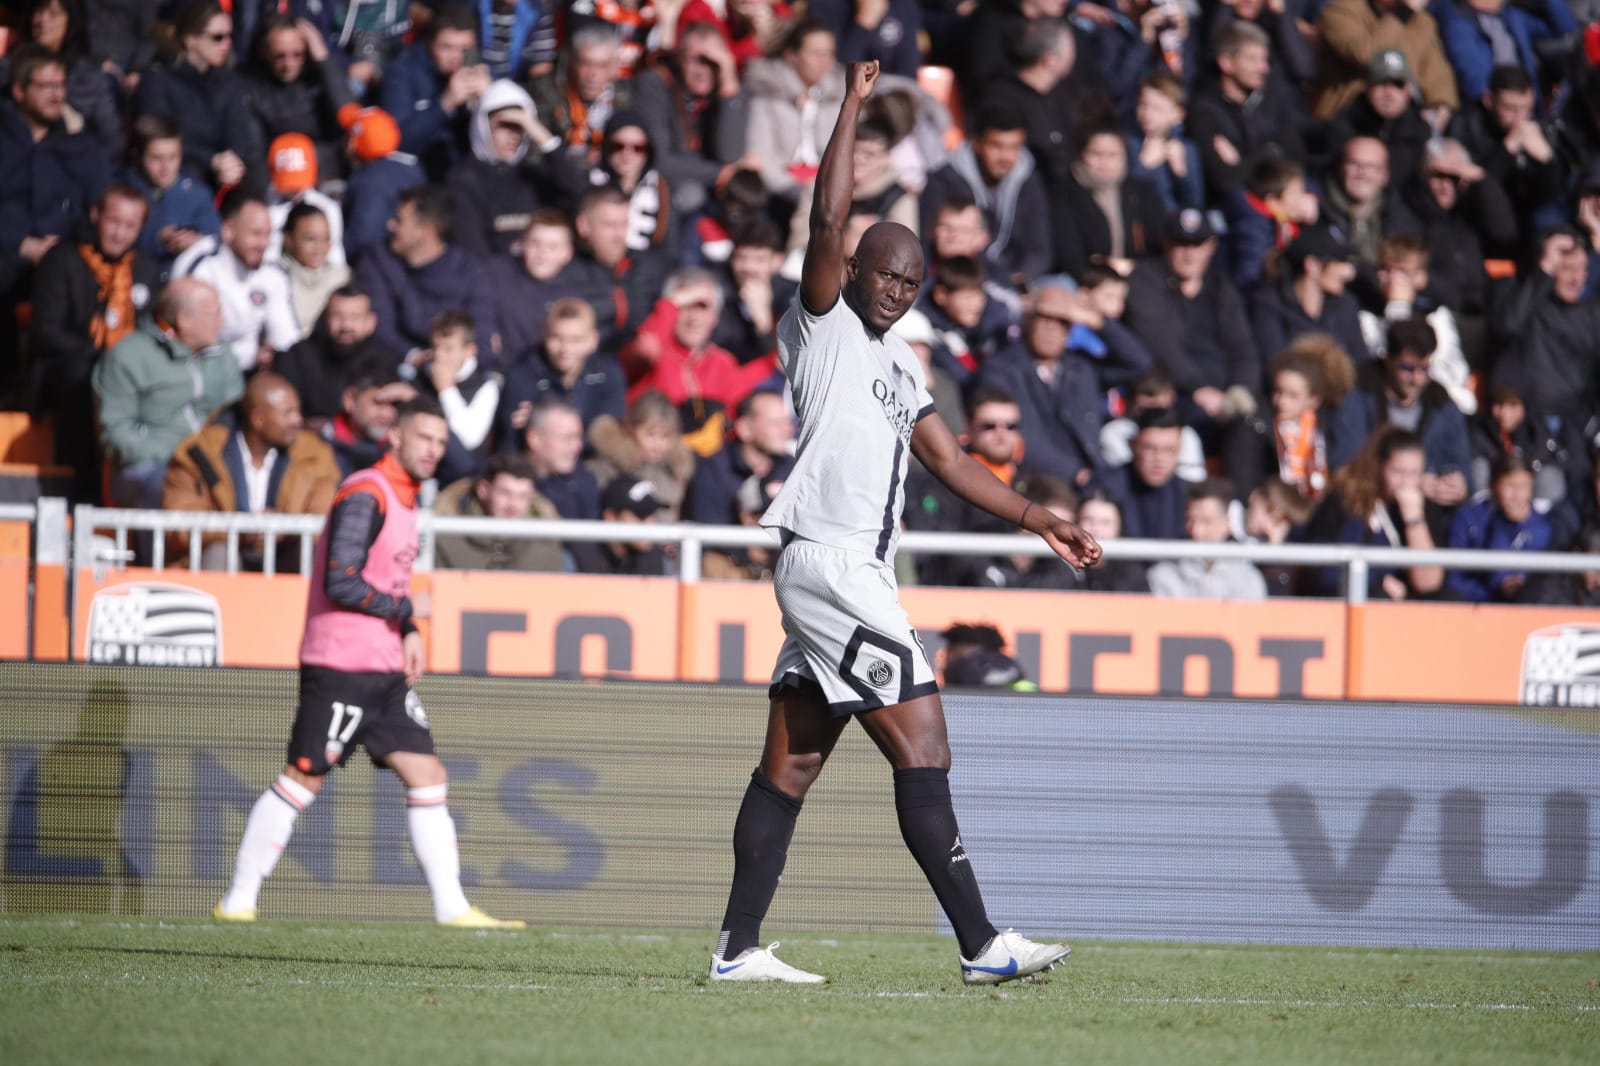 Lorient vs PSG HIGHLIGHTS: FCL 1-2 PSG, Danilo's late header sinks Lorient, PSG extend lead at TOP- CHECK HIGHLIGHTS